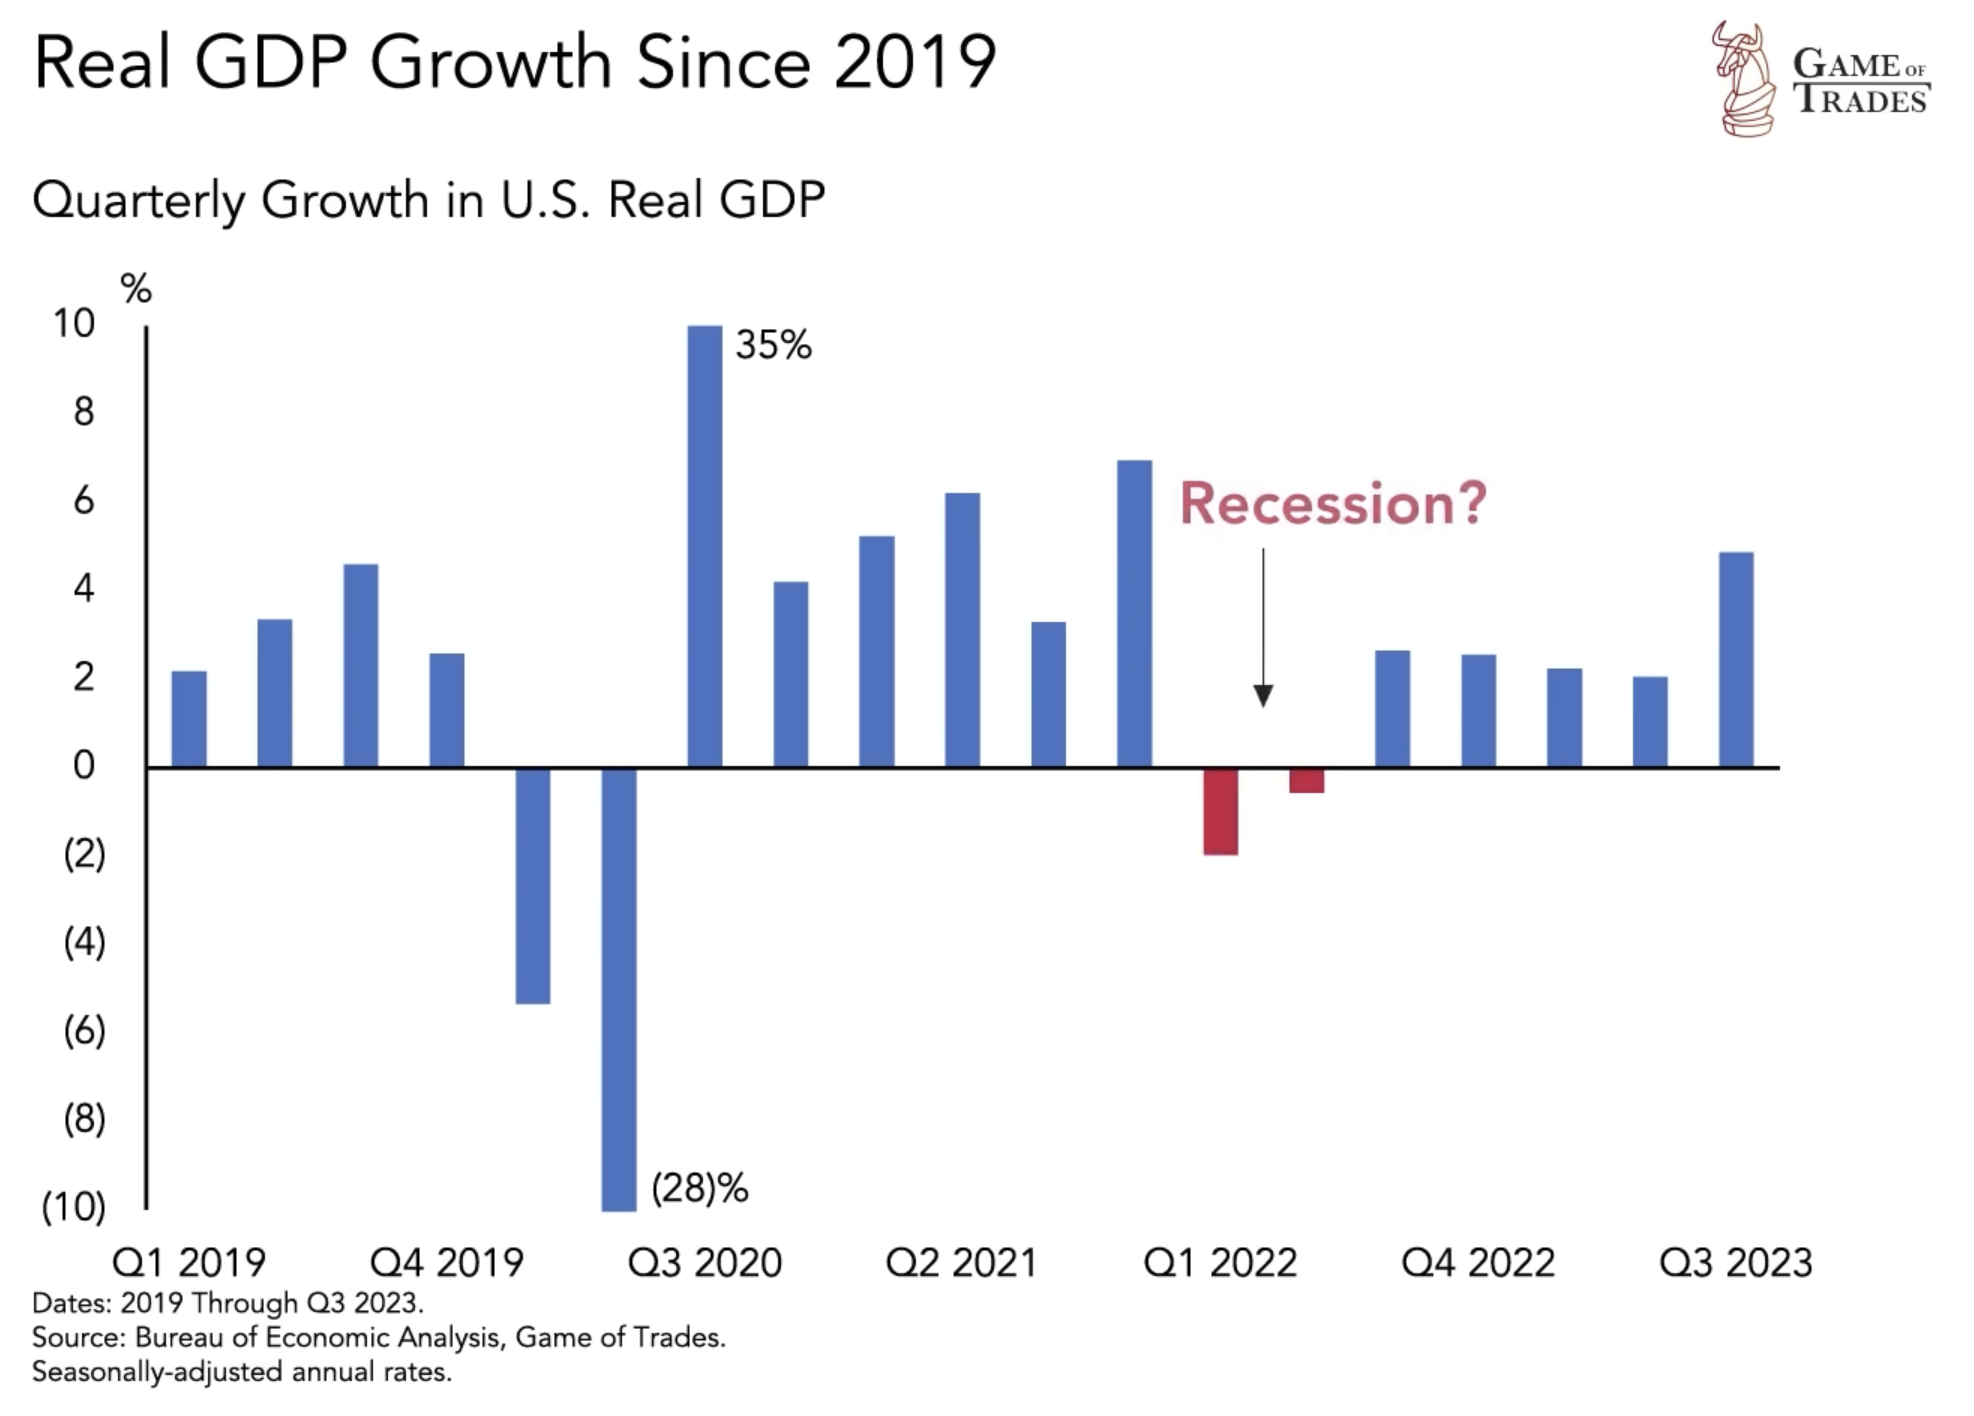 US real GDP growth